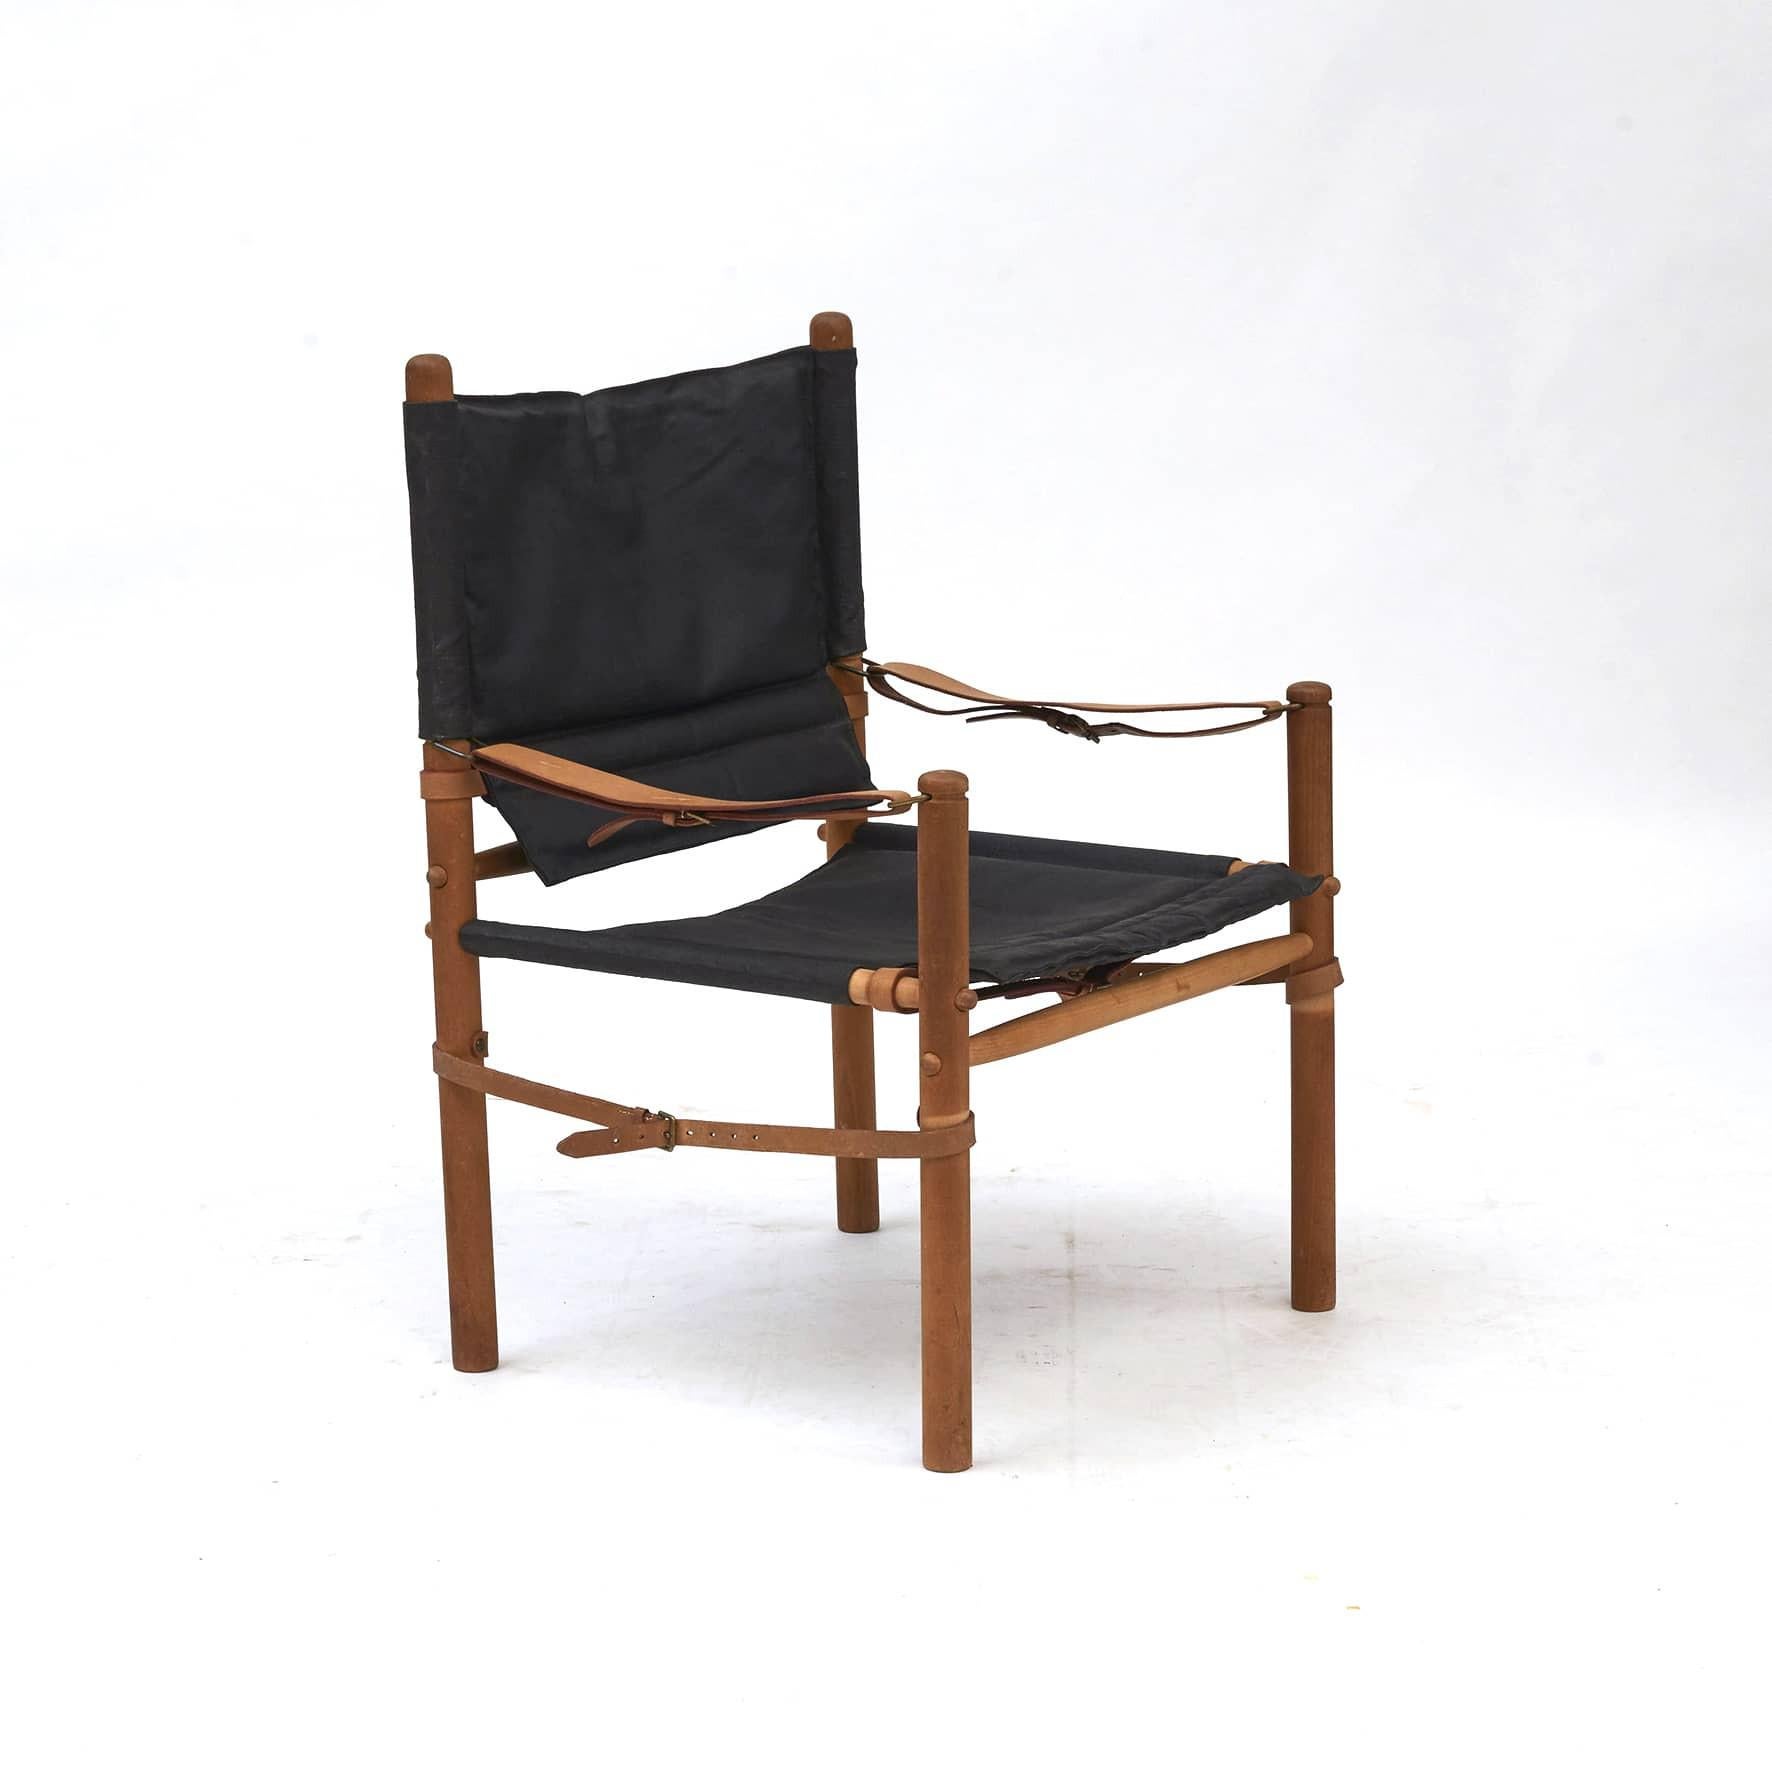 Pair of Oasis Safari chairs designed by Axel Thygesen for Interna, c. 1965.
Designed and manufactured in the 1960s.
Beech frame with a black canvas seating.

Untouched in good original condition.
Sold as a pair.
  